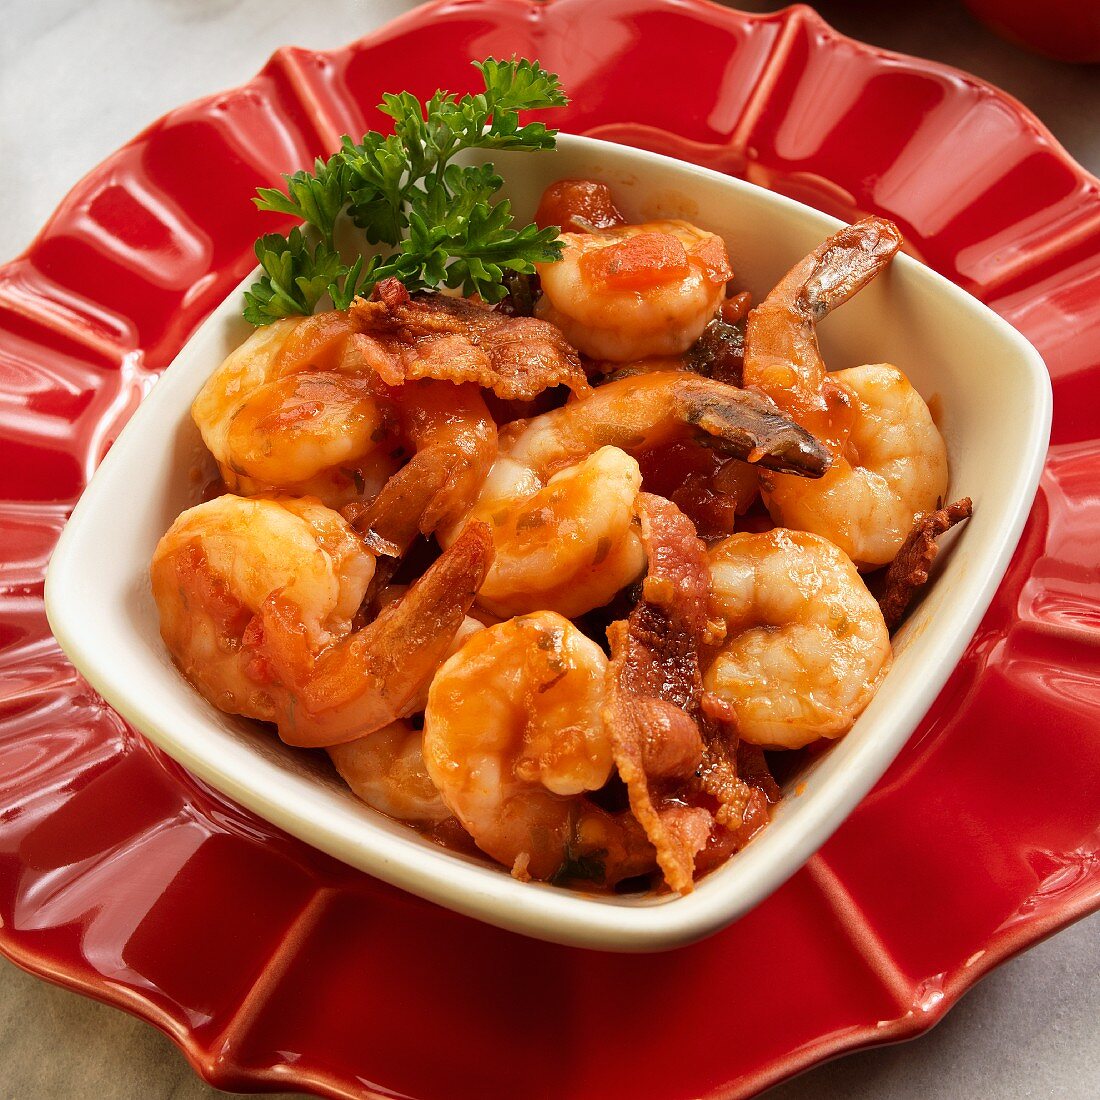 Shrimp in a sherry sauce with bacon, garlic, olive oil and paprika flakes